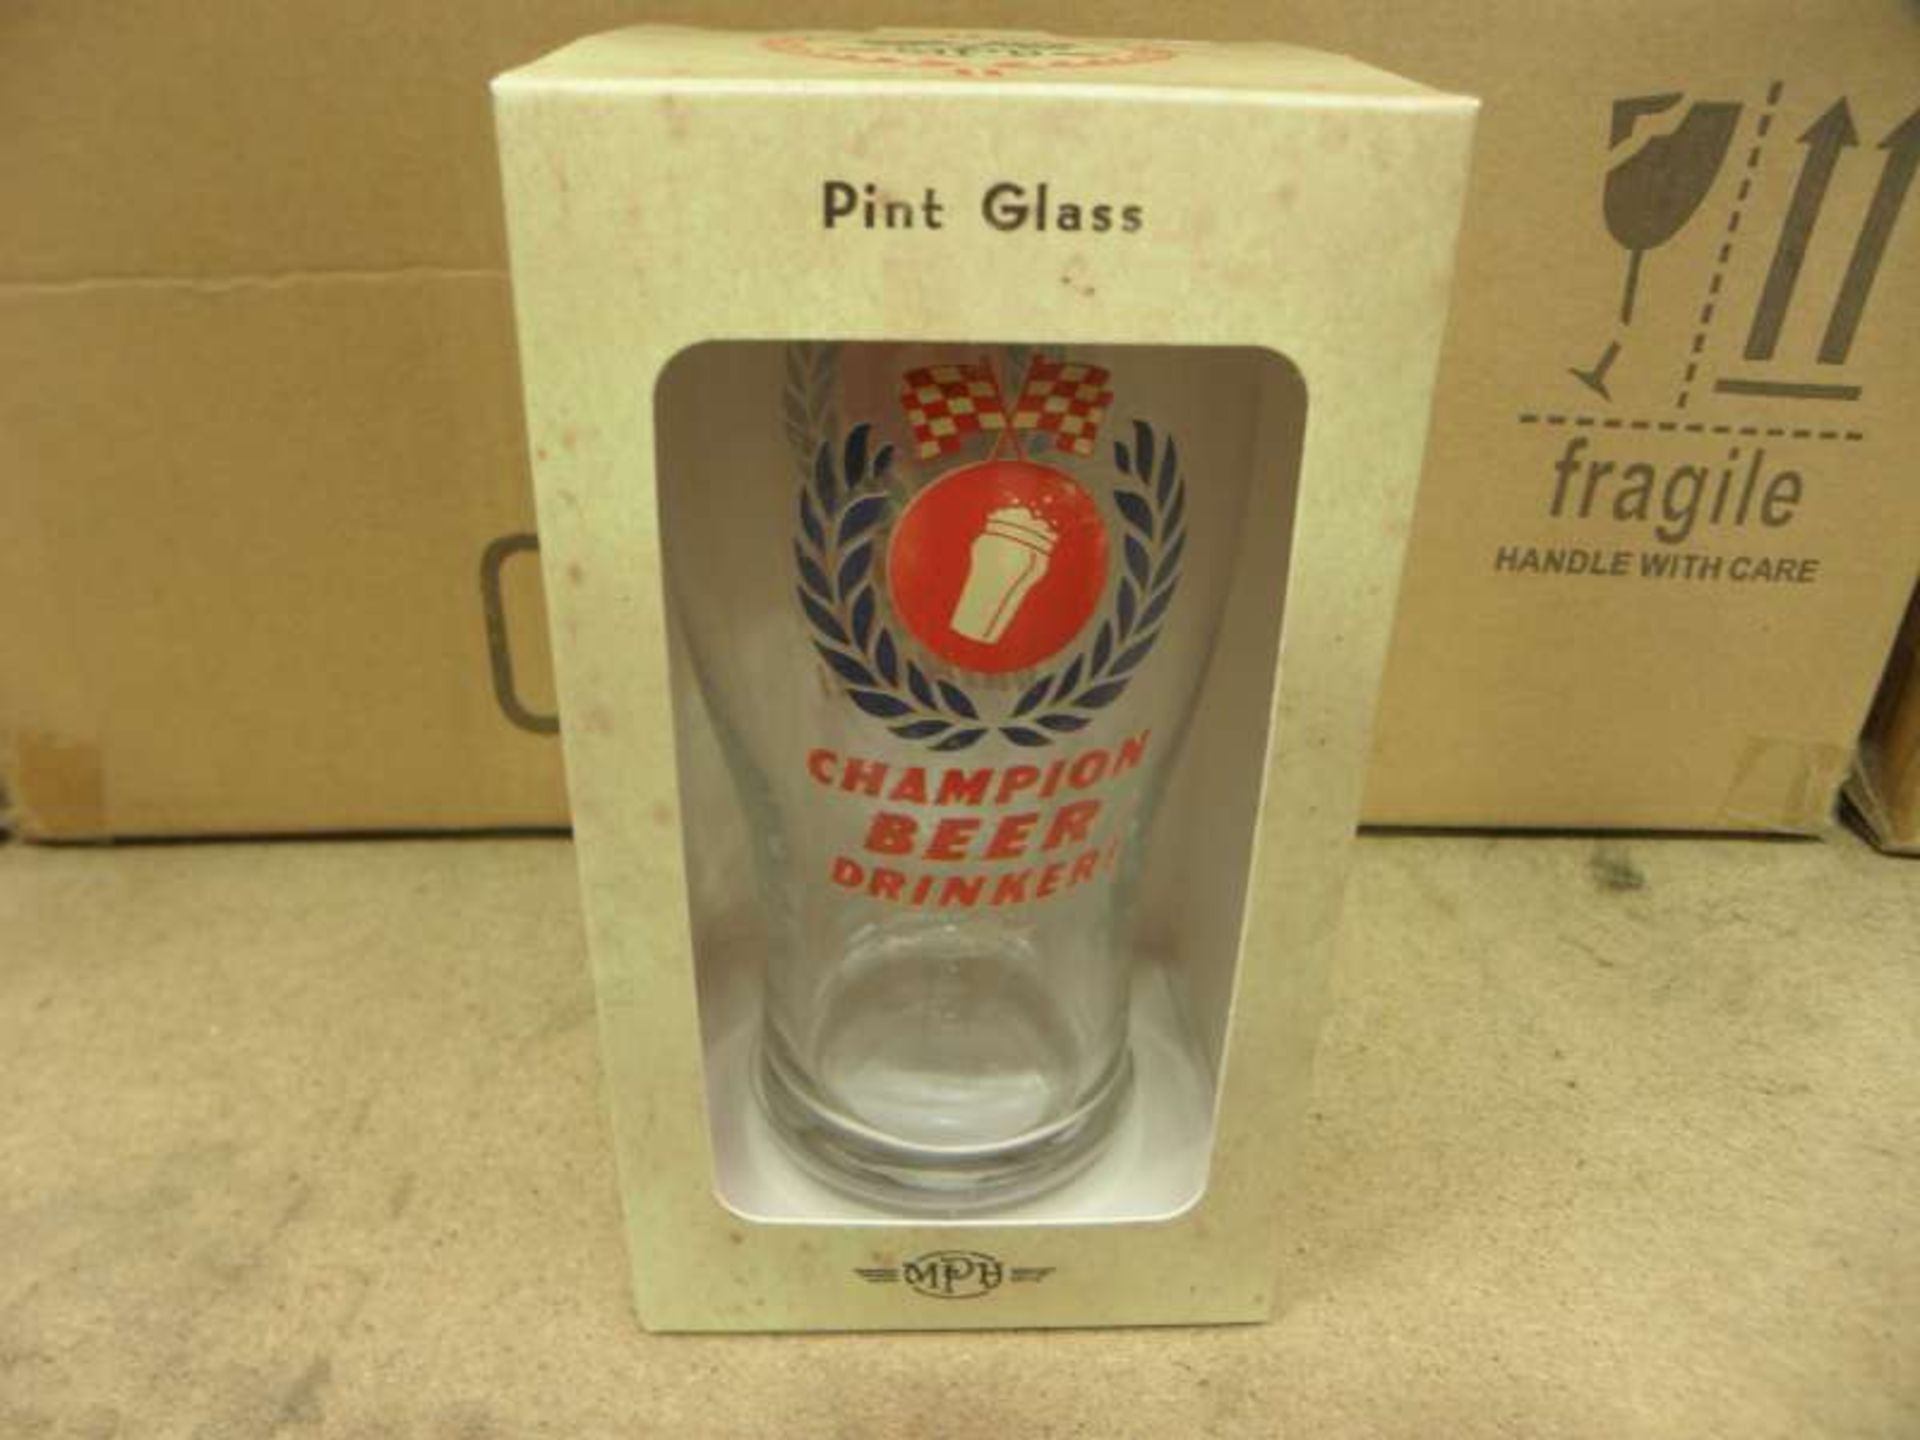 60 X CHAMPION BEER DRINKER PINT GLASSES IN 5 BOXES